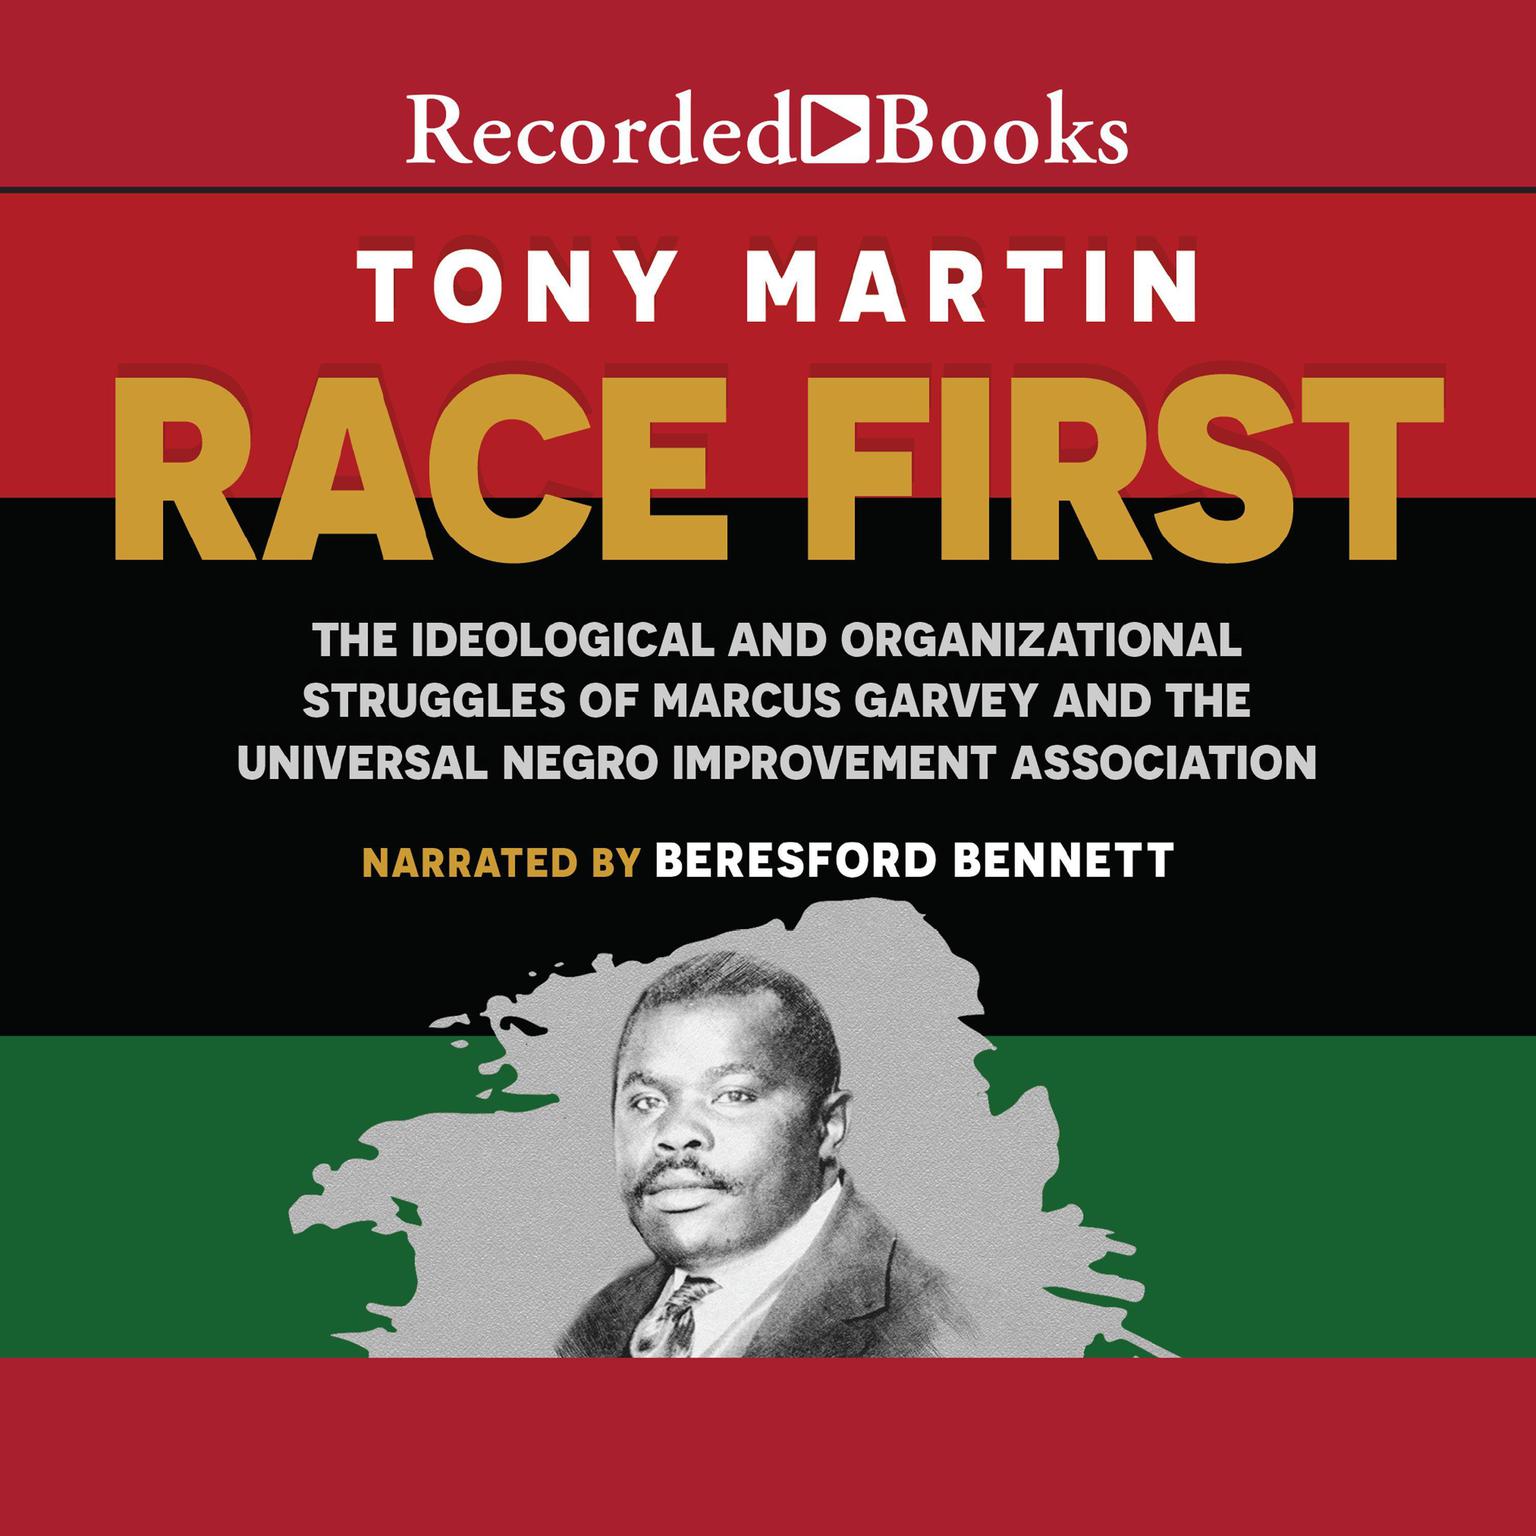 Race First: The Ideological and Organizational Struggles of Marcus Garvey and the Universal Negro Improvement Association Audiobook, by Tony Martin